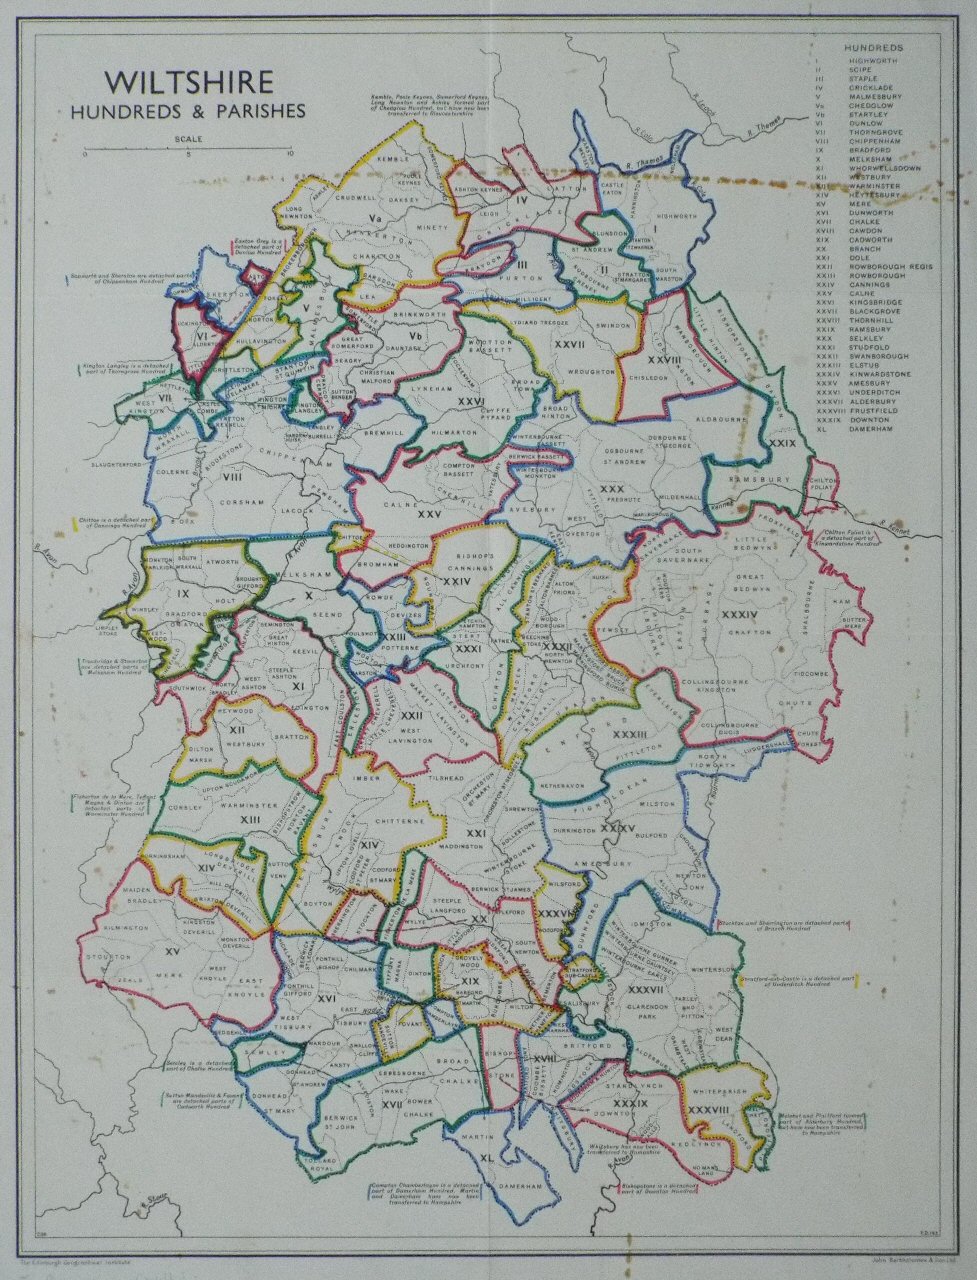 Map of Wiltshire